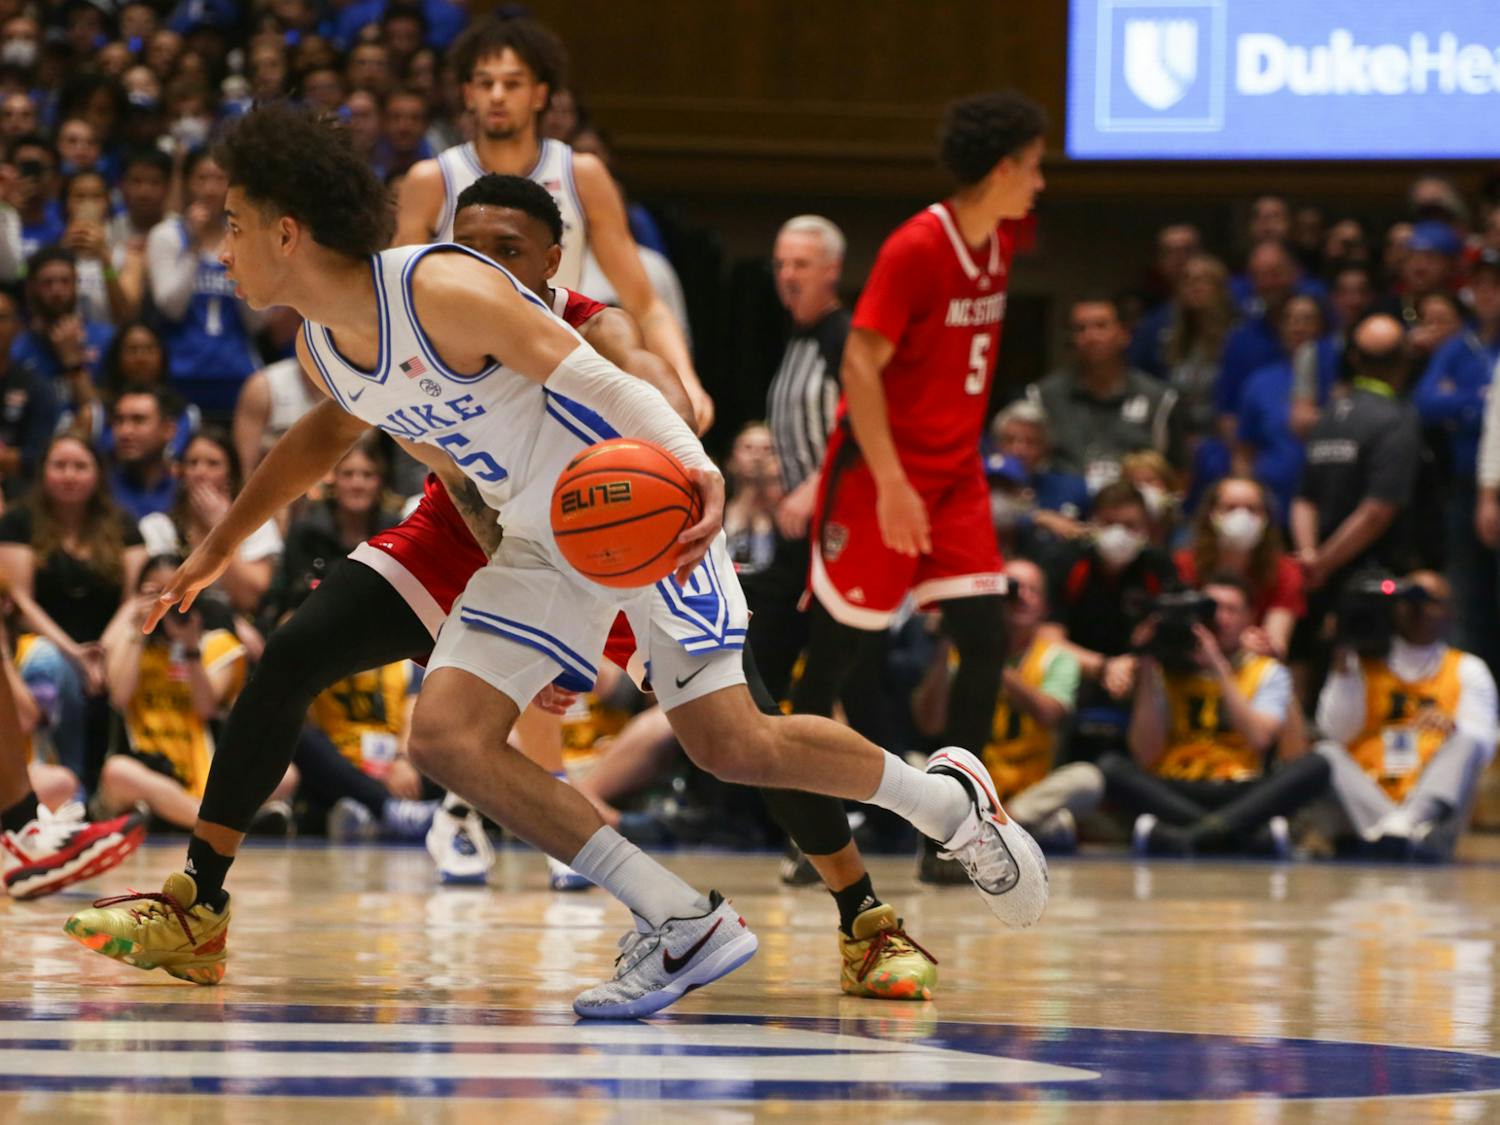 Tyrese Proctor handles the basketball in Duke's win against N.C. State.